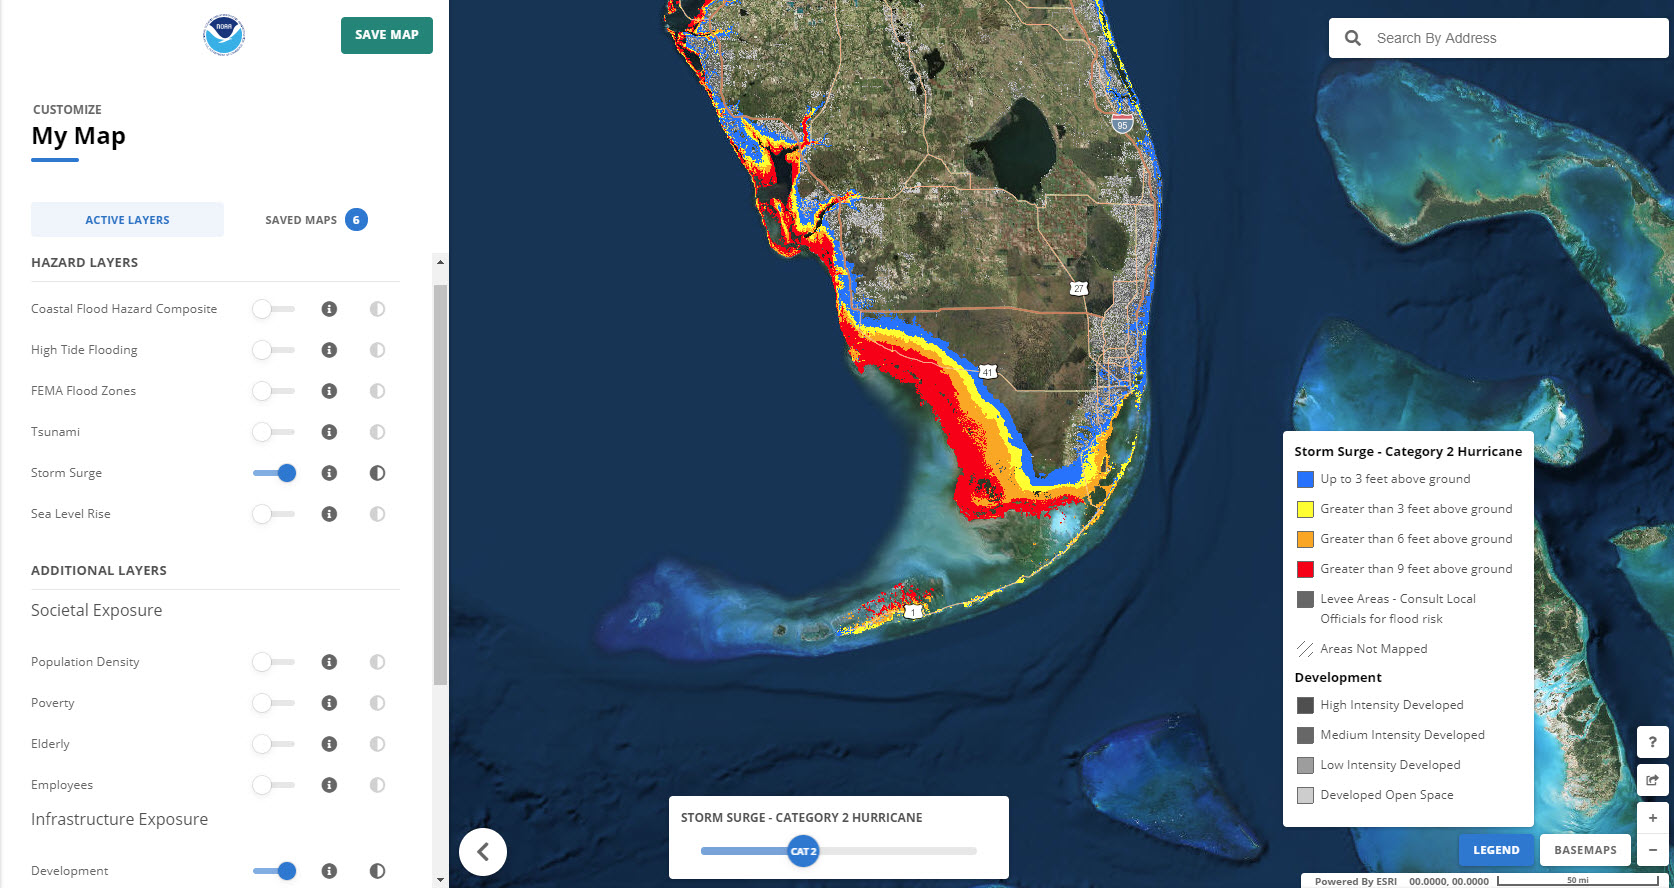 A screenshot of the tool, Coastal Flood Exposure Mapper, being used.